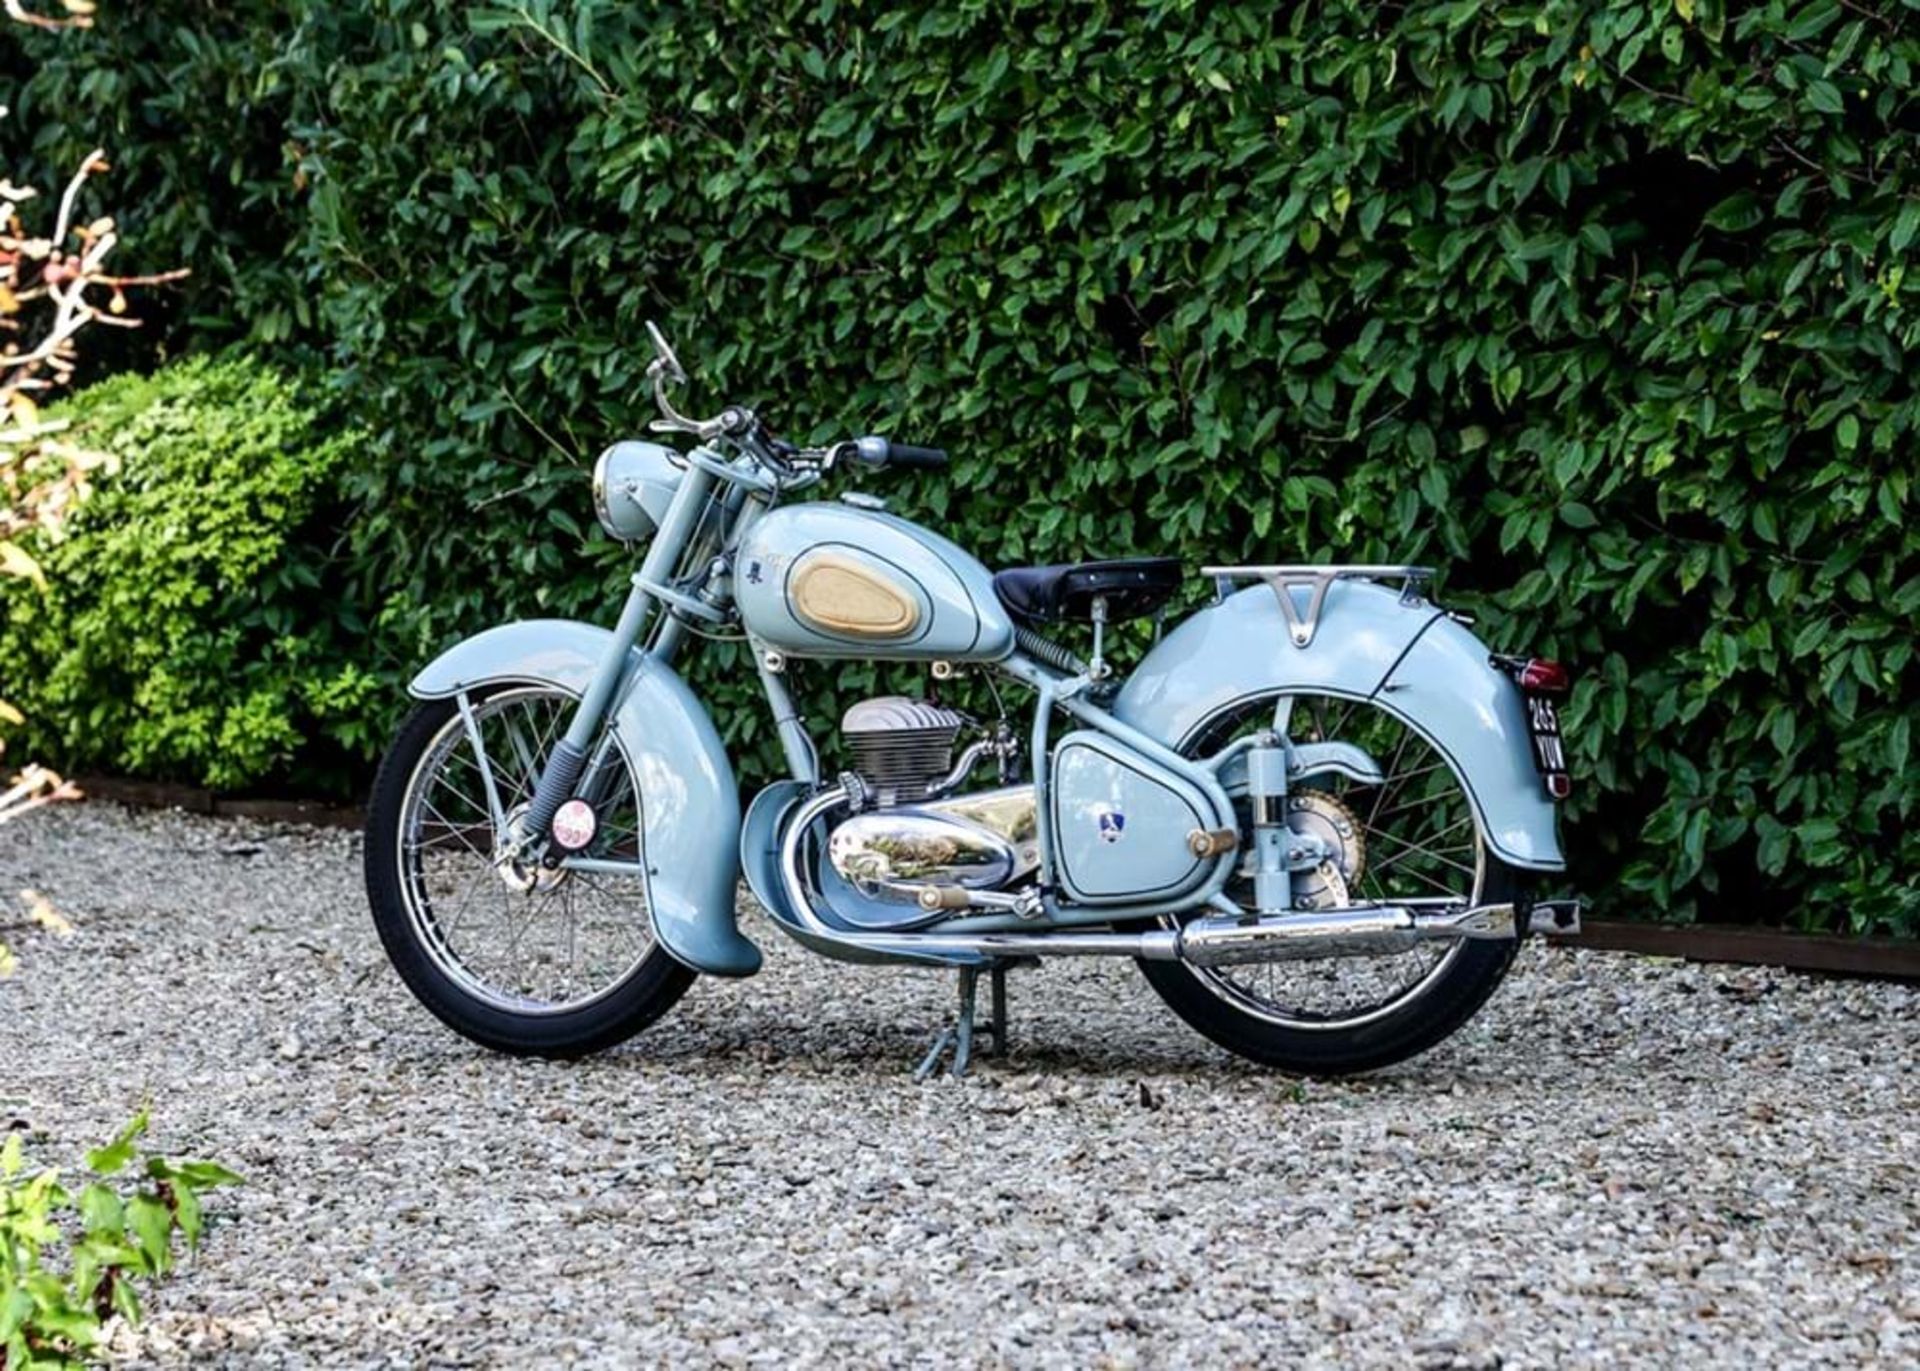 1953 Peugeot Type 55 TCL (125cc) - Image 2 of 10